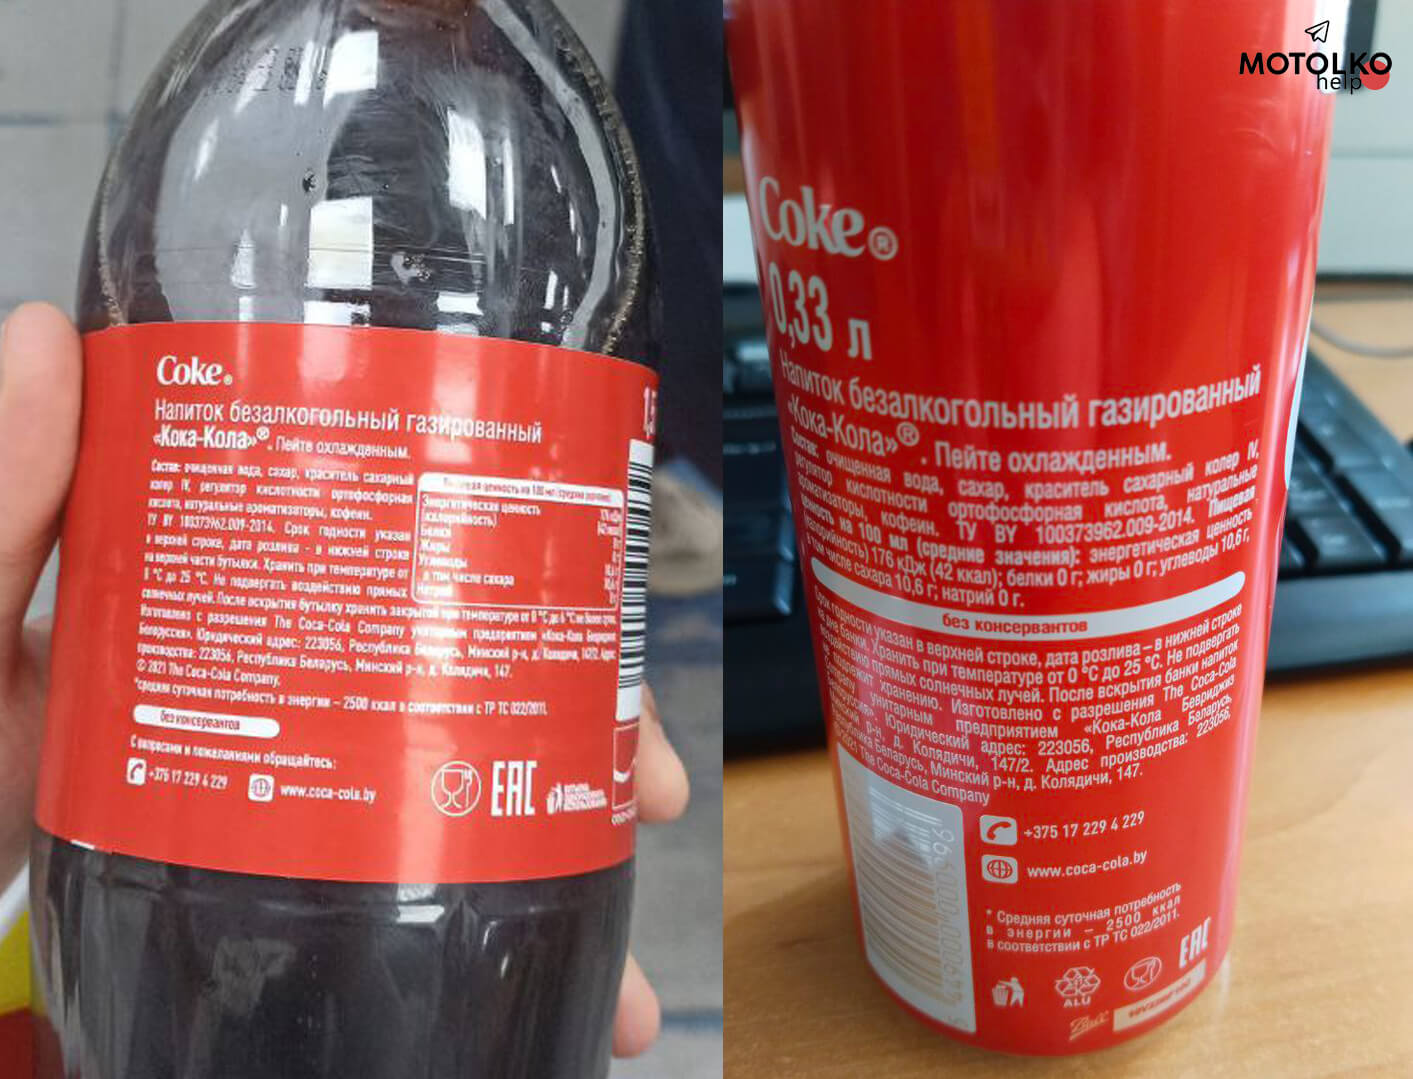 Investigation: Coca-Cola produced in Belarus is being sold in Crimea